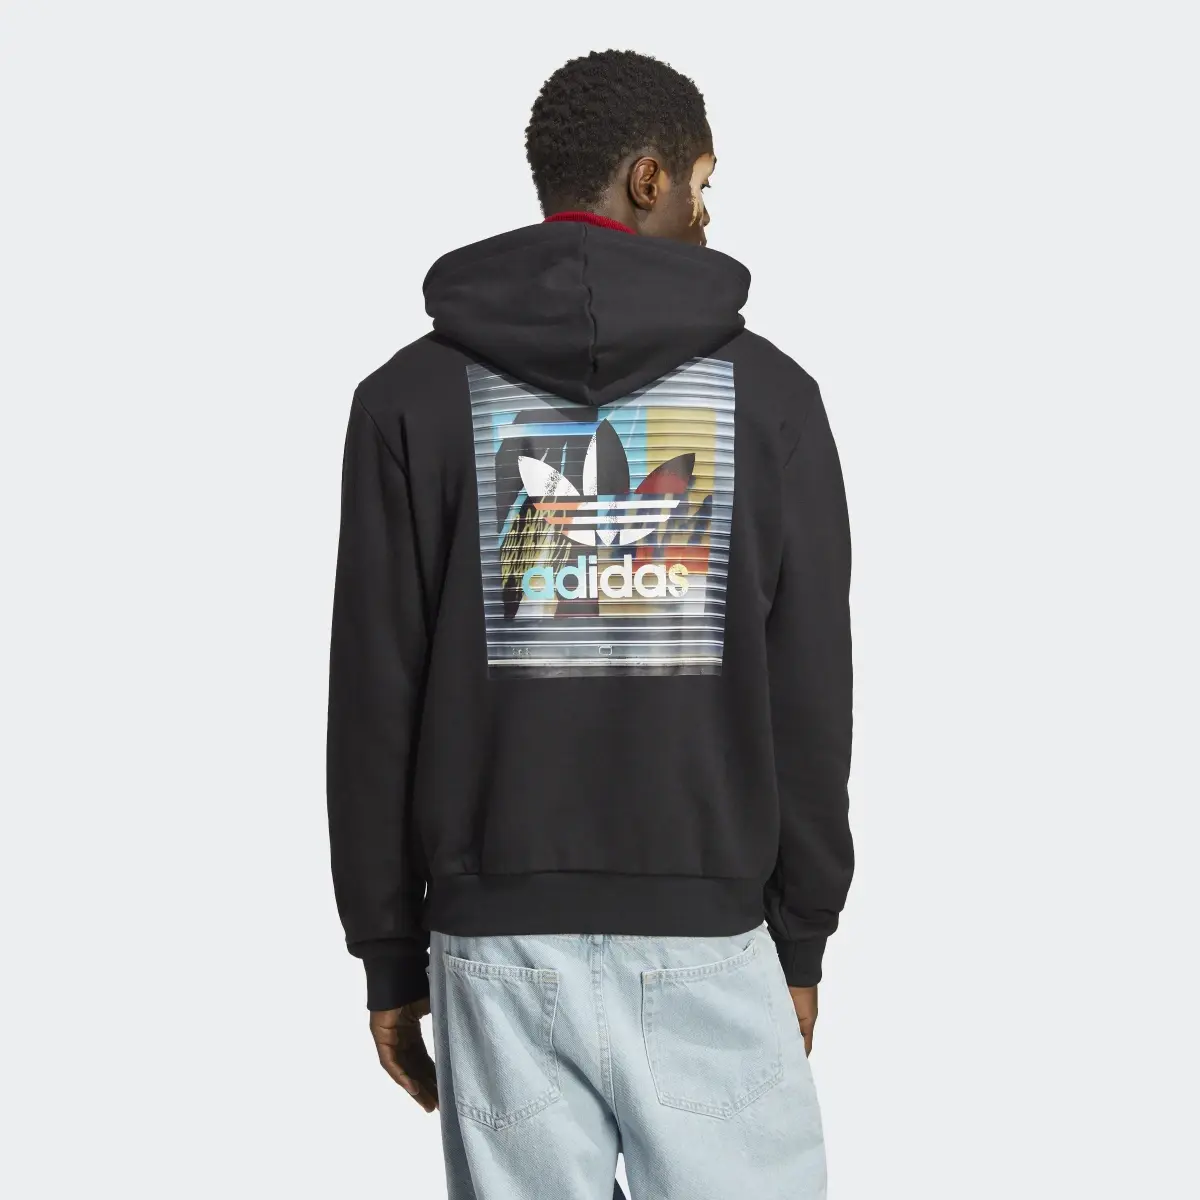 Adidas Graphics off the Grid Hoodie. 3